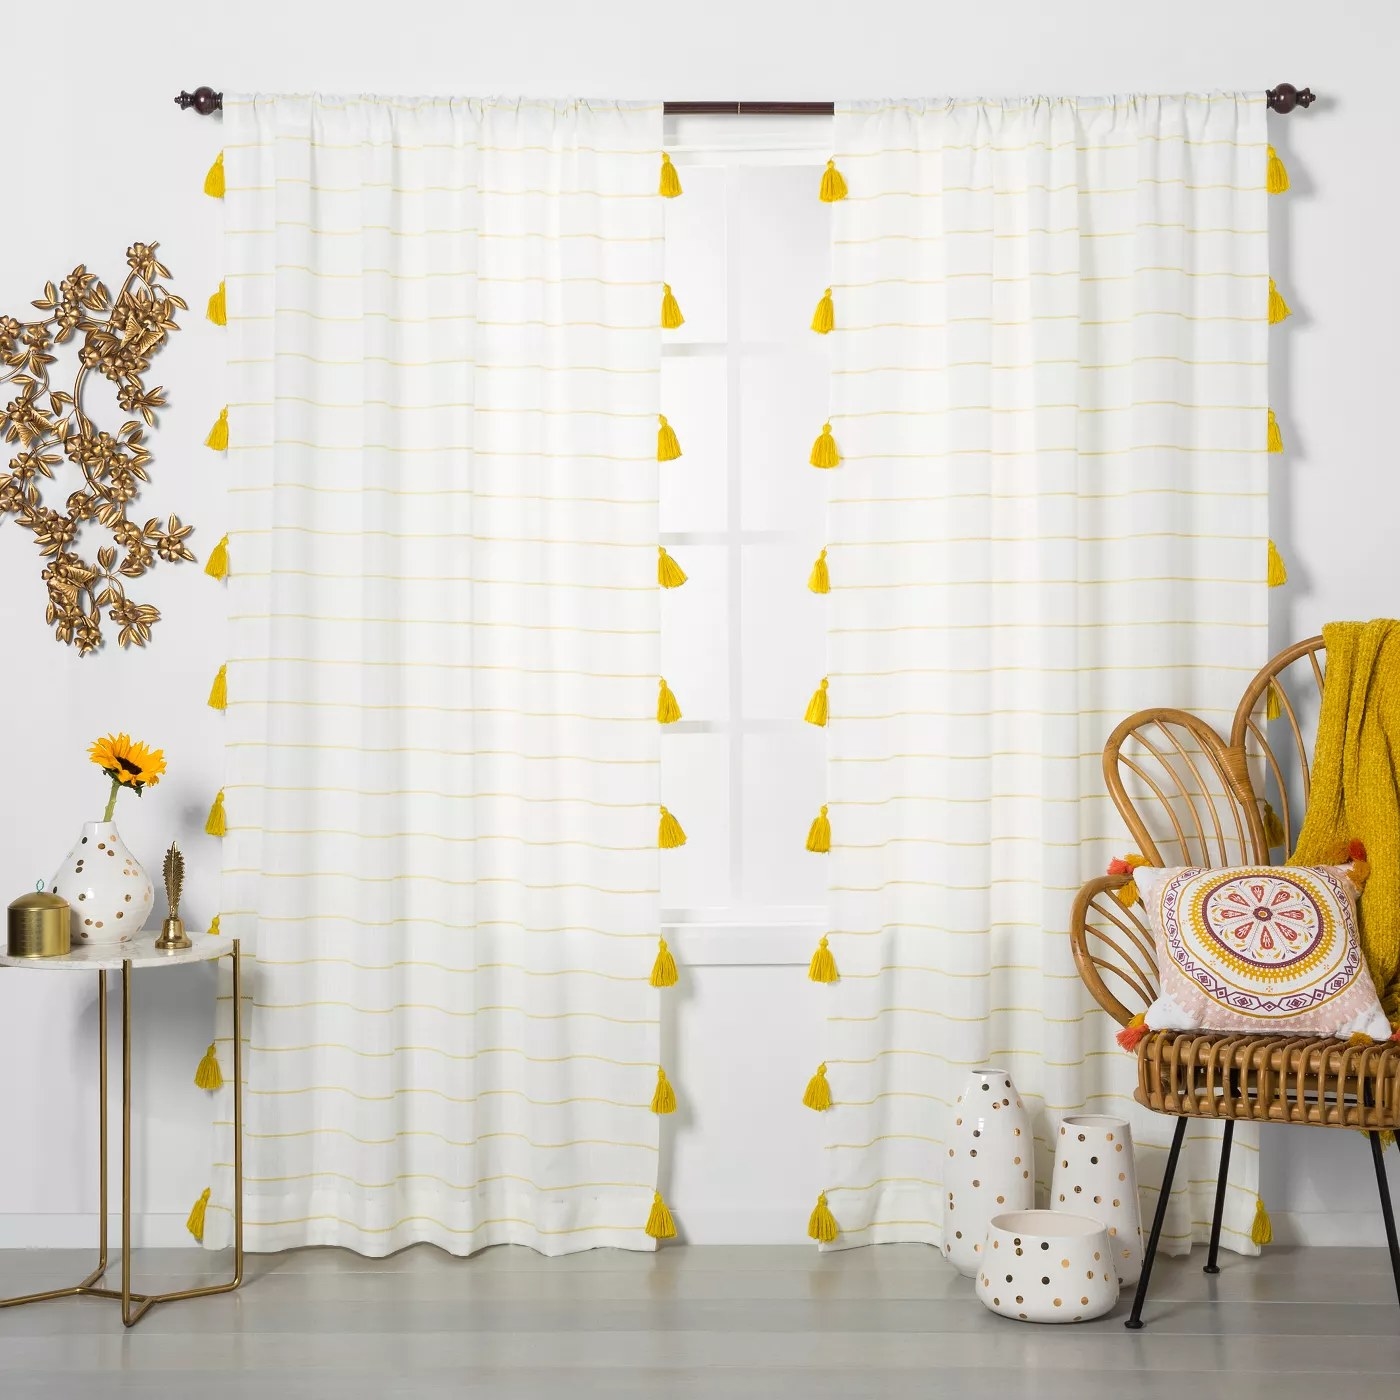 The white curtains with horizontal yellow stripes and matching tassels